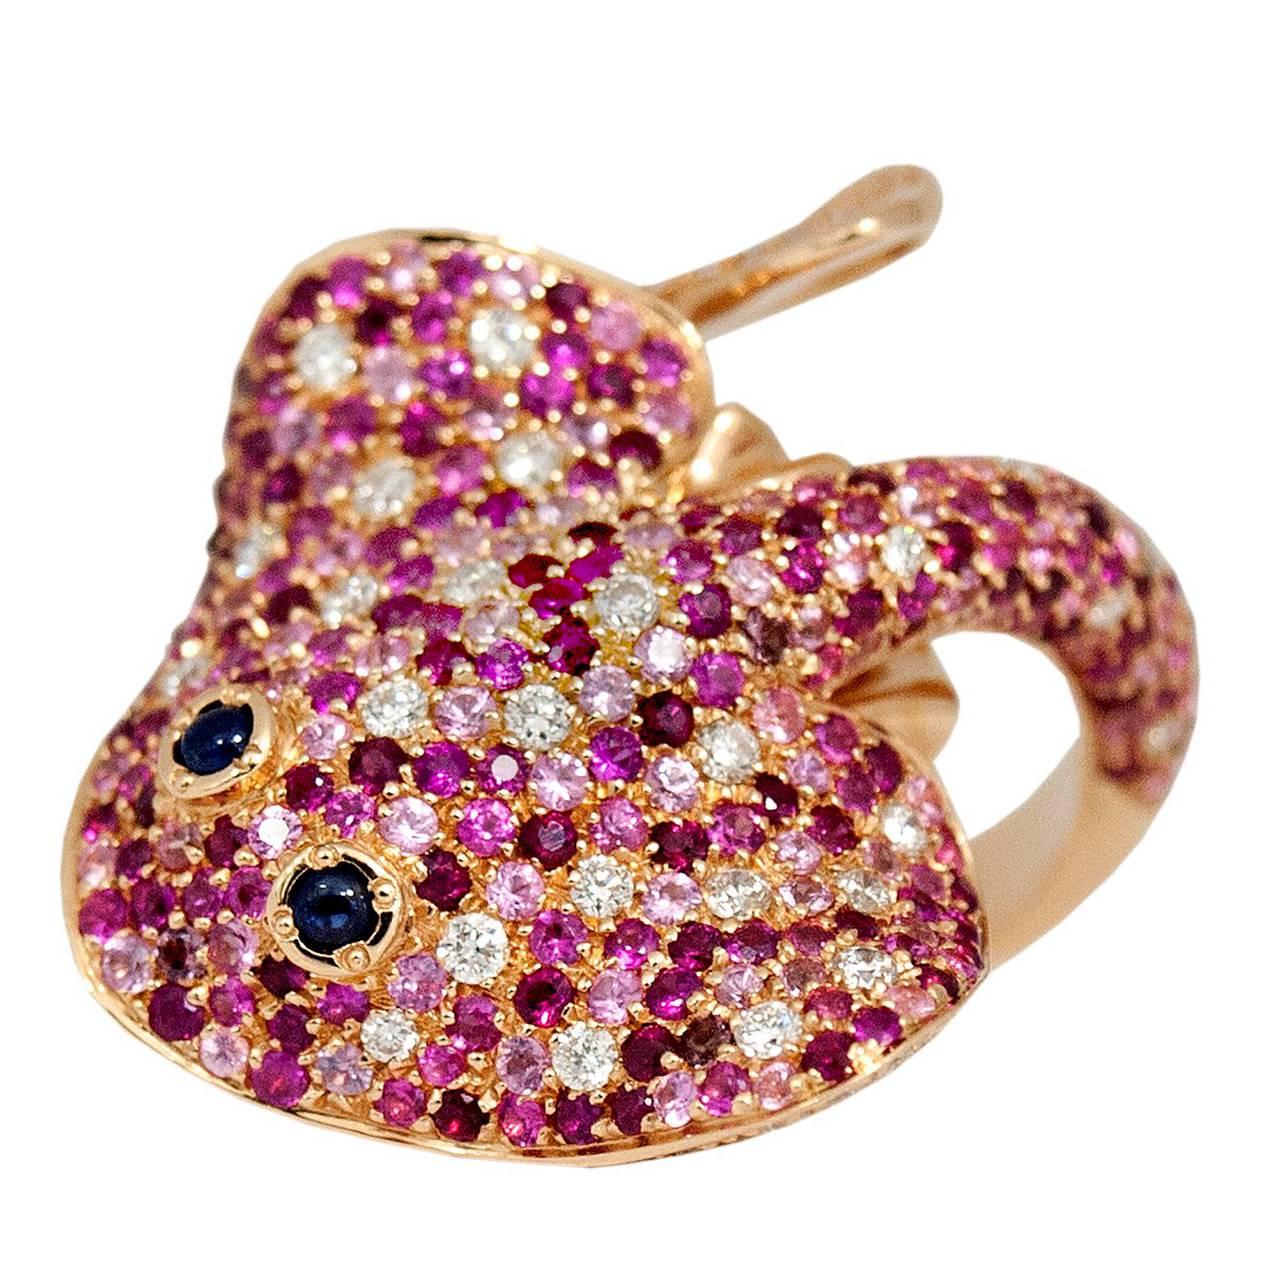 Ray Fish White Diamond Pink and Blue Sapphire Ruby 18 Kt Gold Ring Made in Italy
This ring is inspired by the sea and nature, it's a ray fish in red gold covered by many precious stones such as white diamonds, pink sapphires (in three kinds of